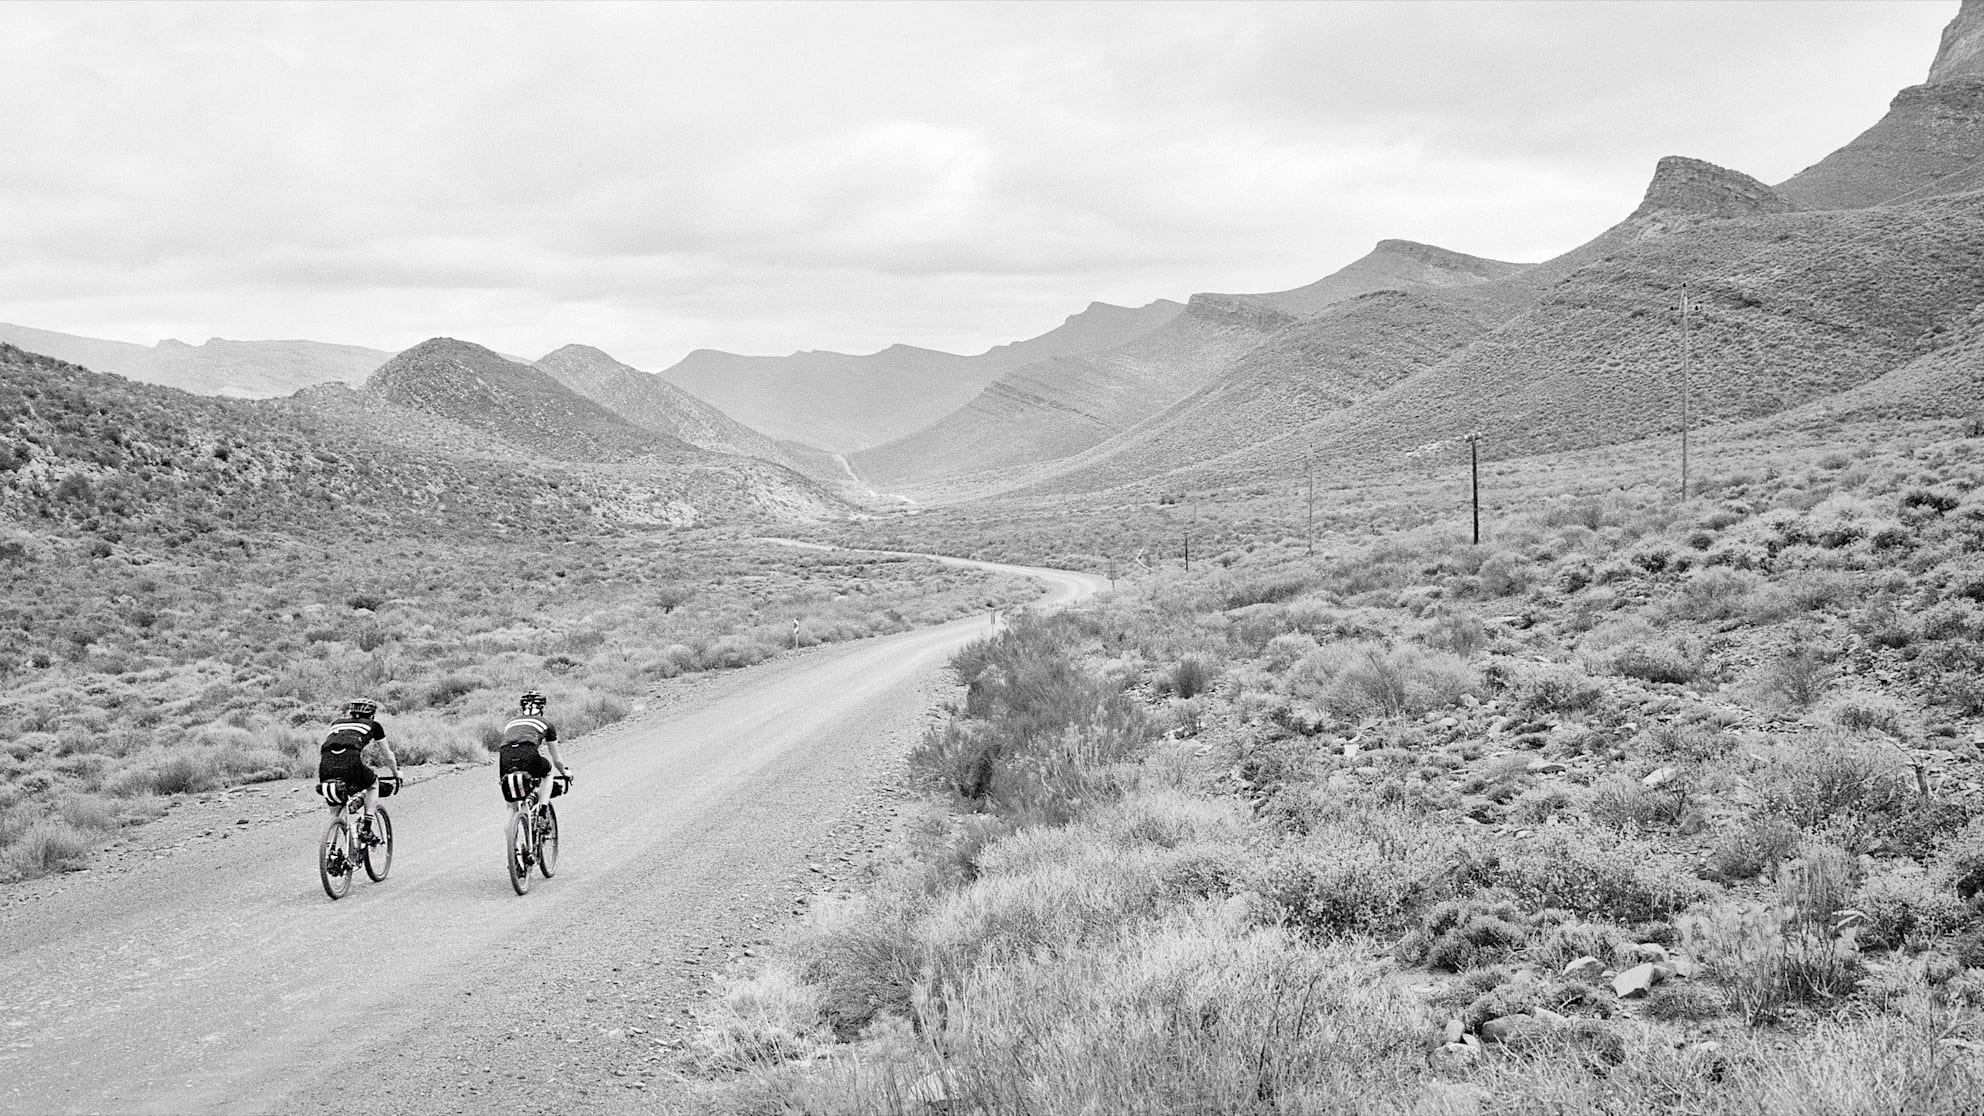 For the launch of the Brevet collection, three riders travelled to South Africa to explore part of the Tour of Ara – a 700km race across some of the country’s most notorious and challenging terrain.